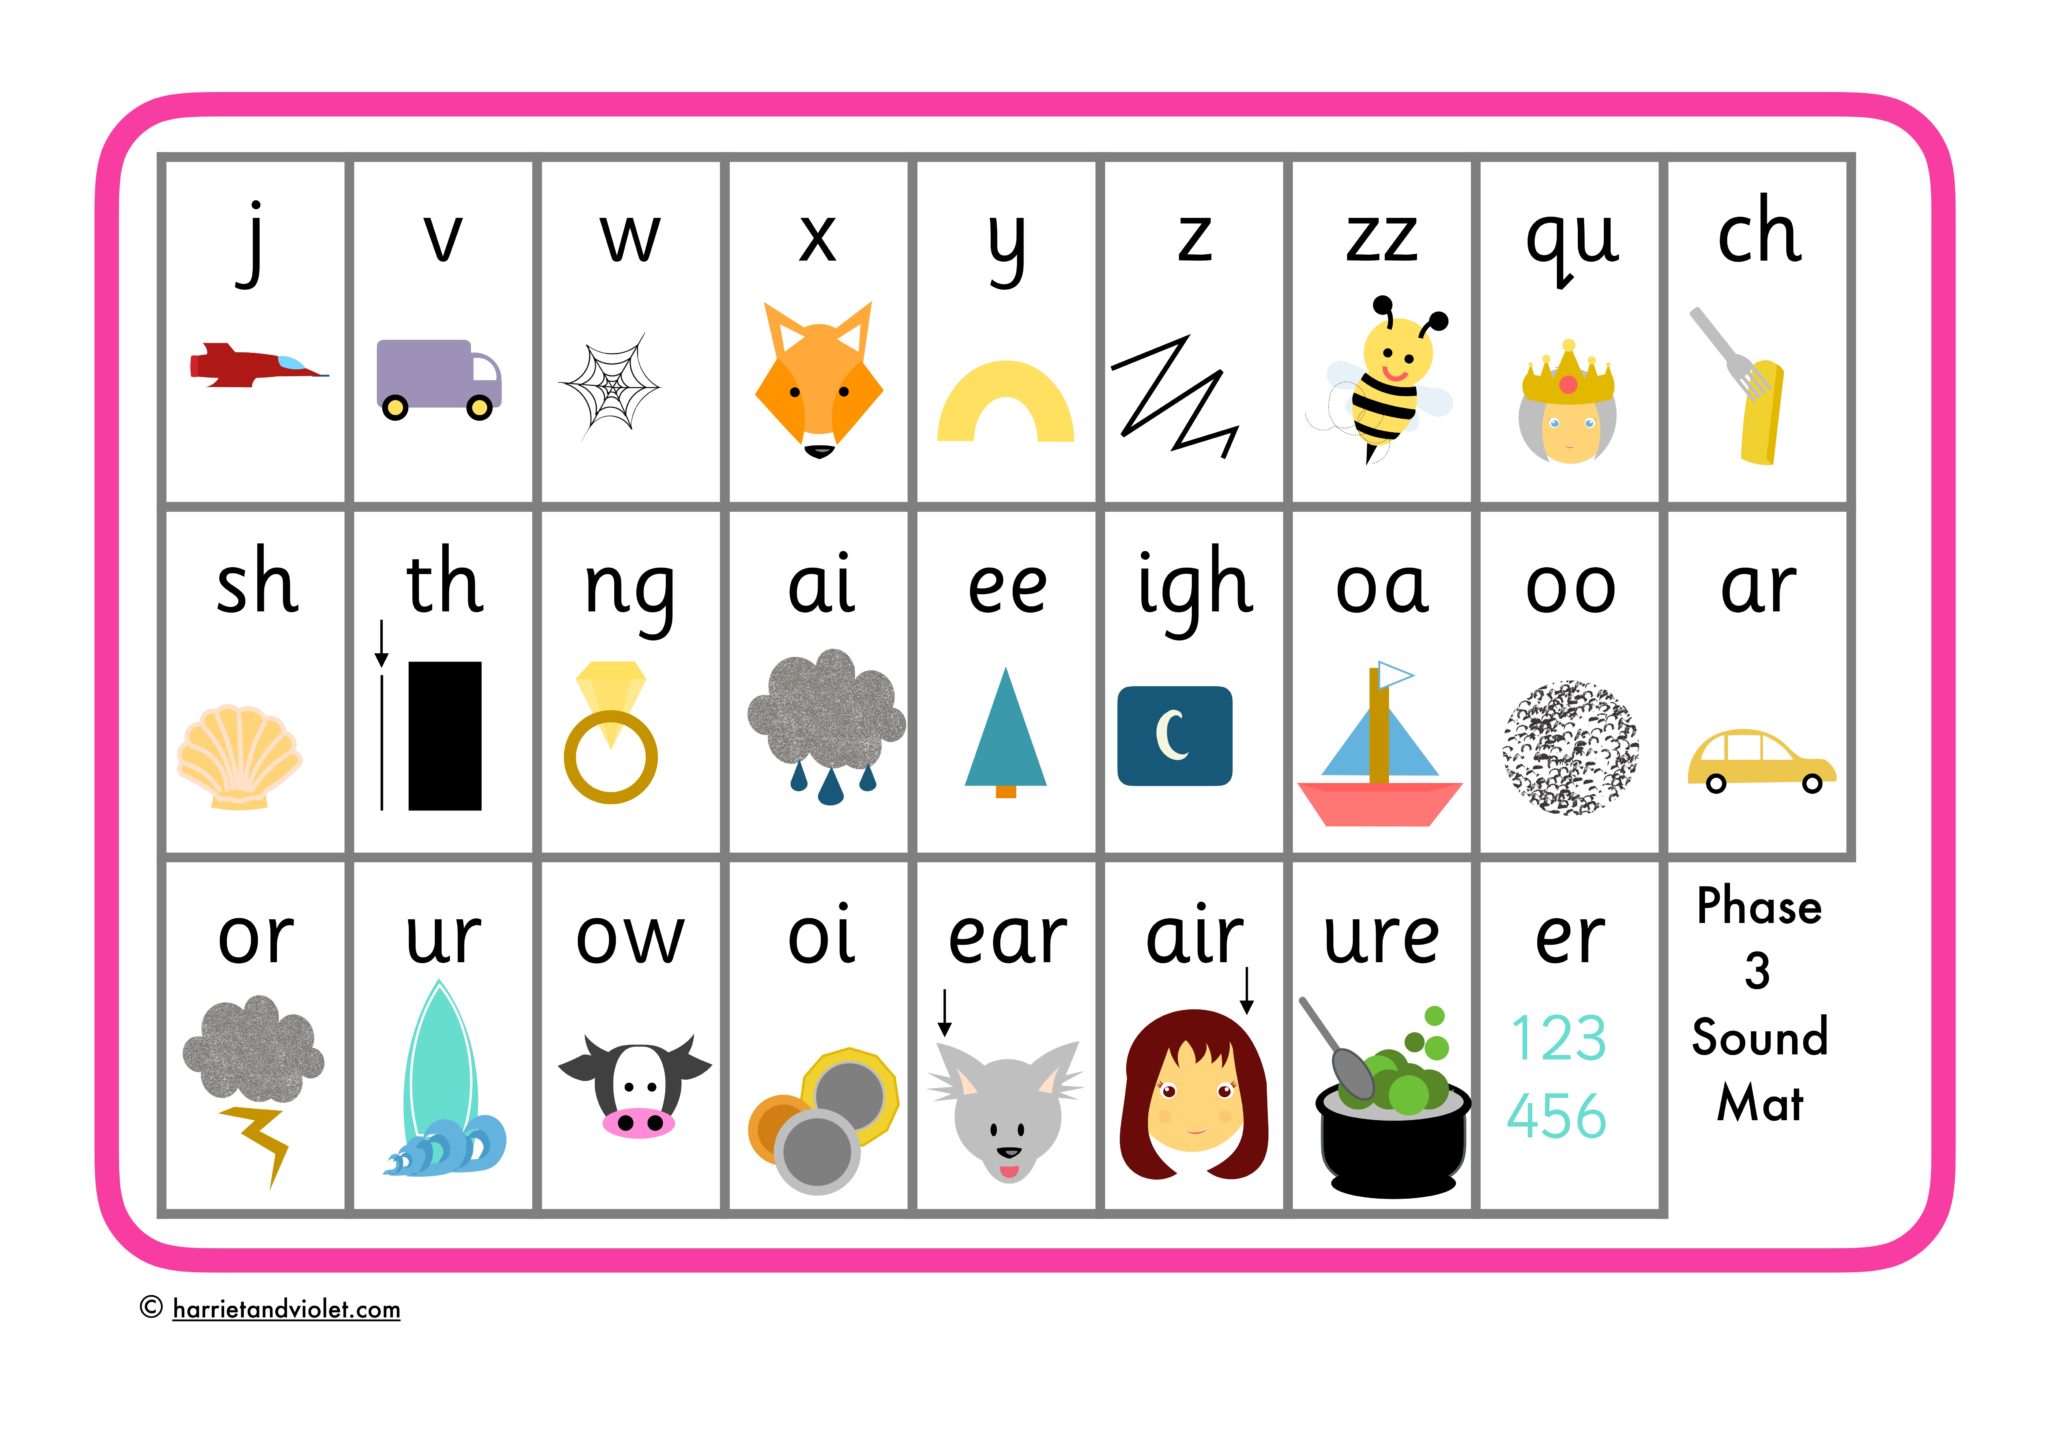 Phase 3 Phonics Sound Mat - letters + sounds - Printable Teaching Resources  - Print Play Learn